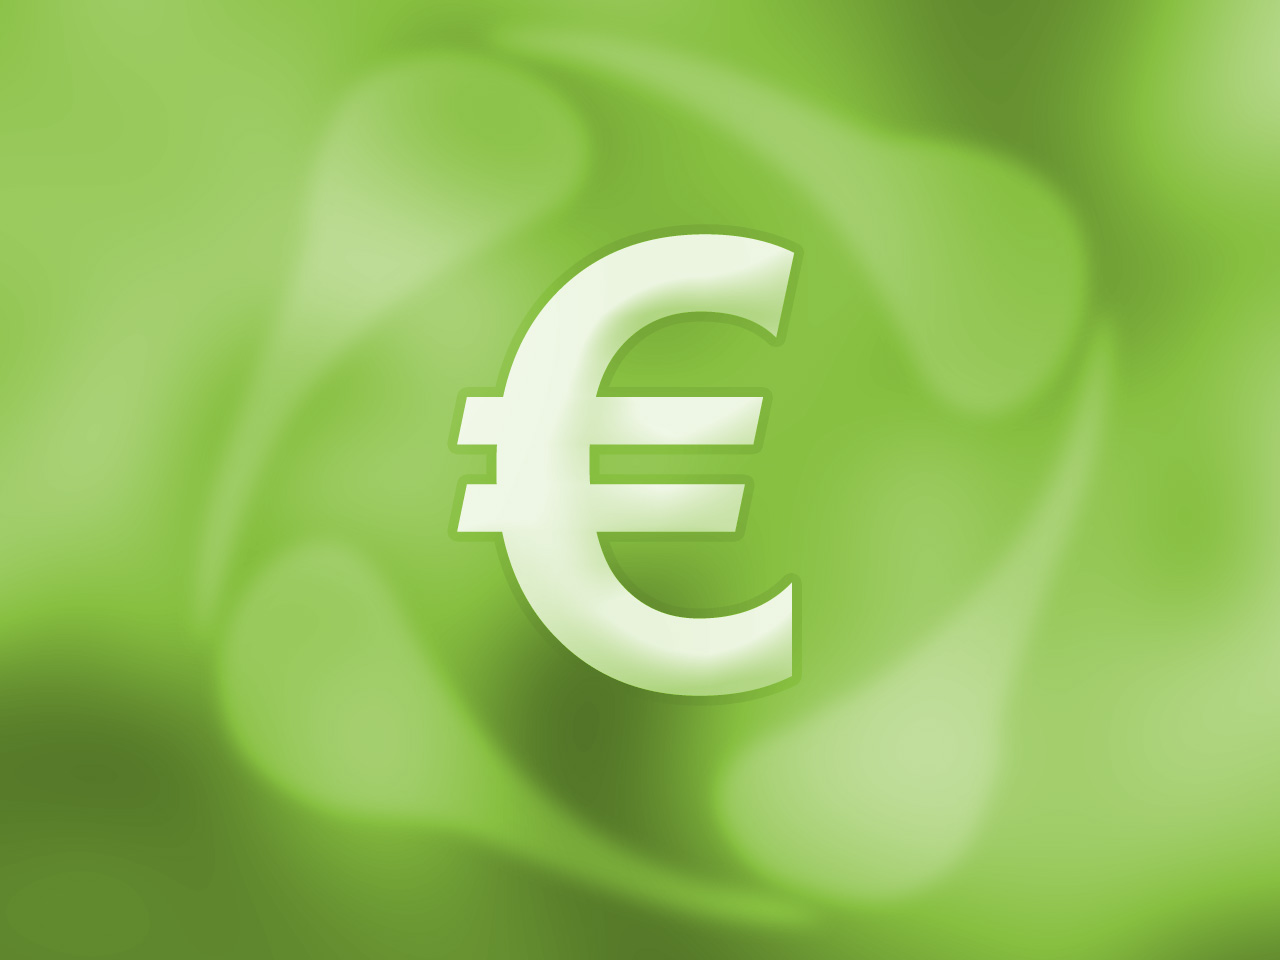 Euro currency sign on green